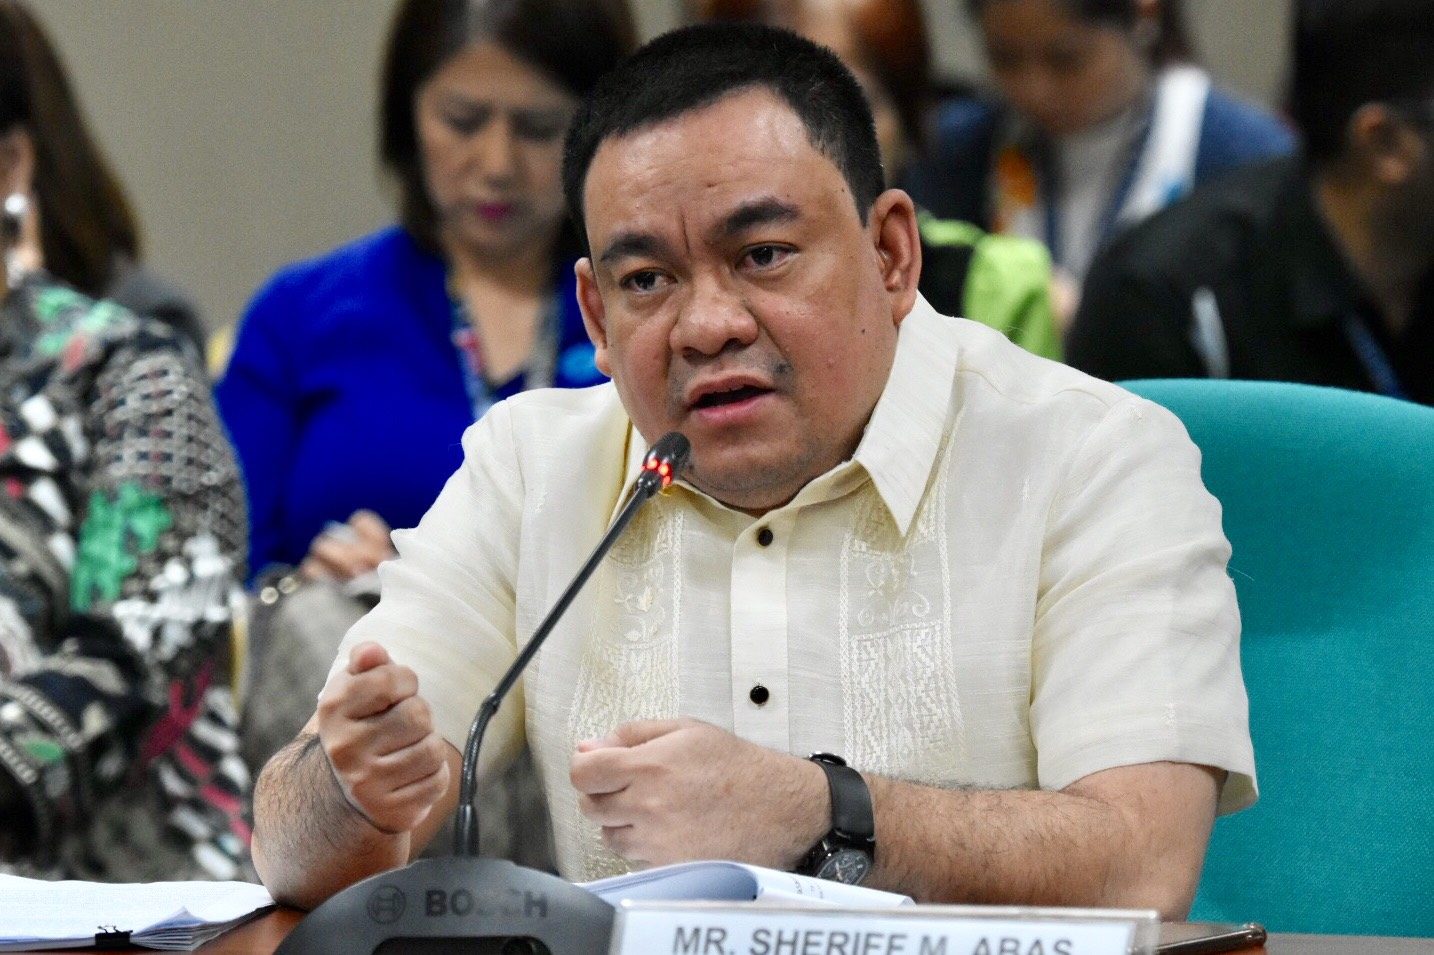 CA confirms Sheriff Abas as Comelec chair